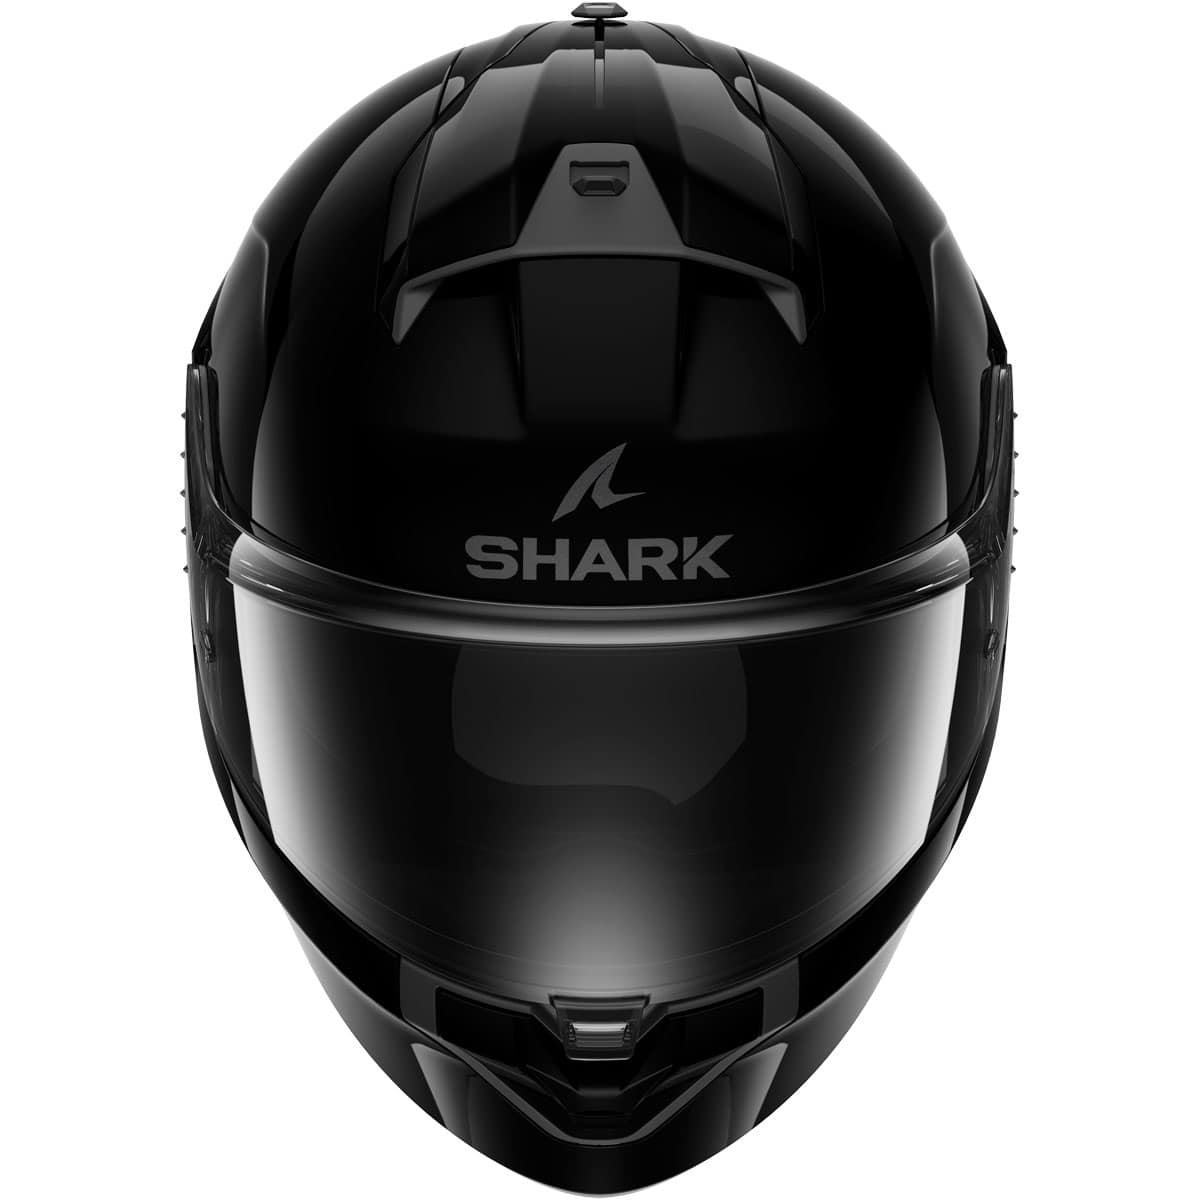 The Shark Ridill helmet is in it's 2nd rework. Featuring an all-new design and exceptional features, the Shark Ridill 2 showcases a streetwear look with air inlets and an effective rear spoiler